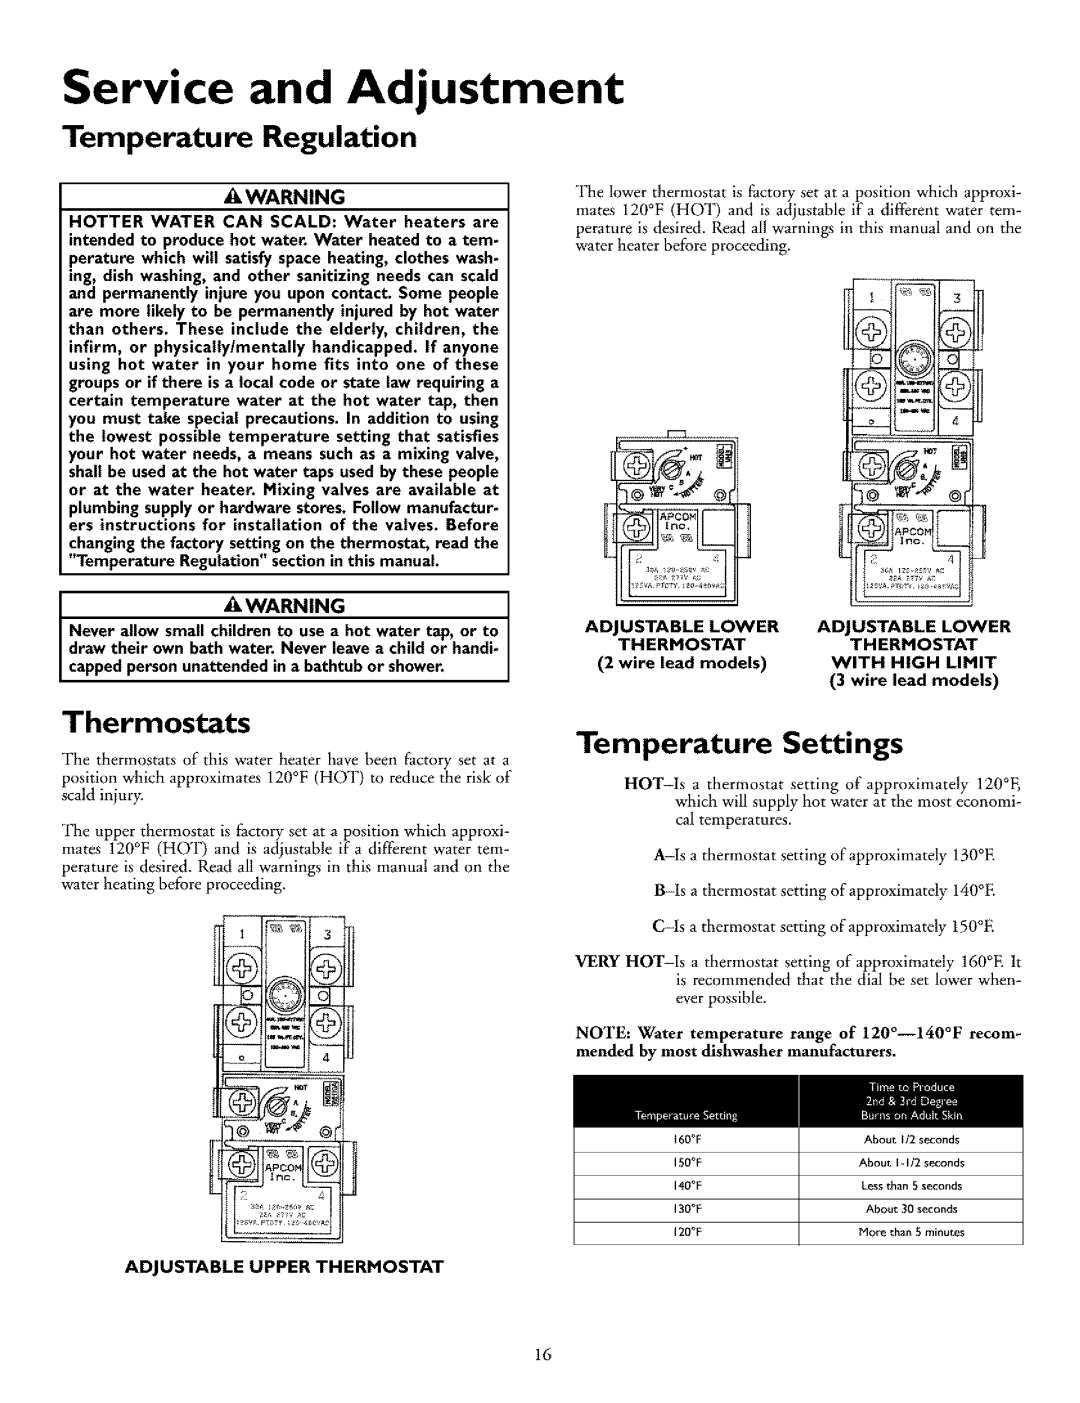 Kenmore 153.326761, 153.326561 Service and Adjustment, Temperature Regulation, Thermostats, Temperature Settings 